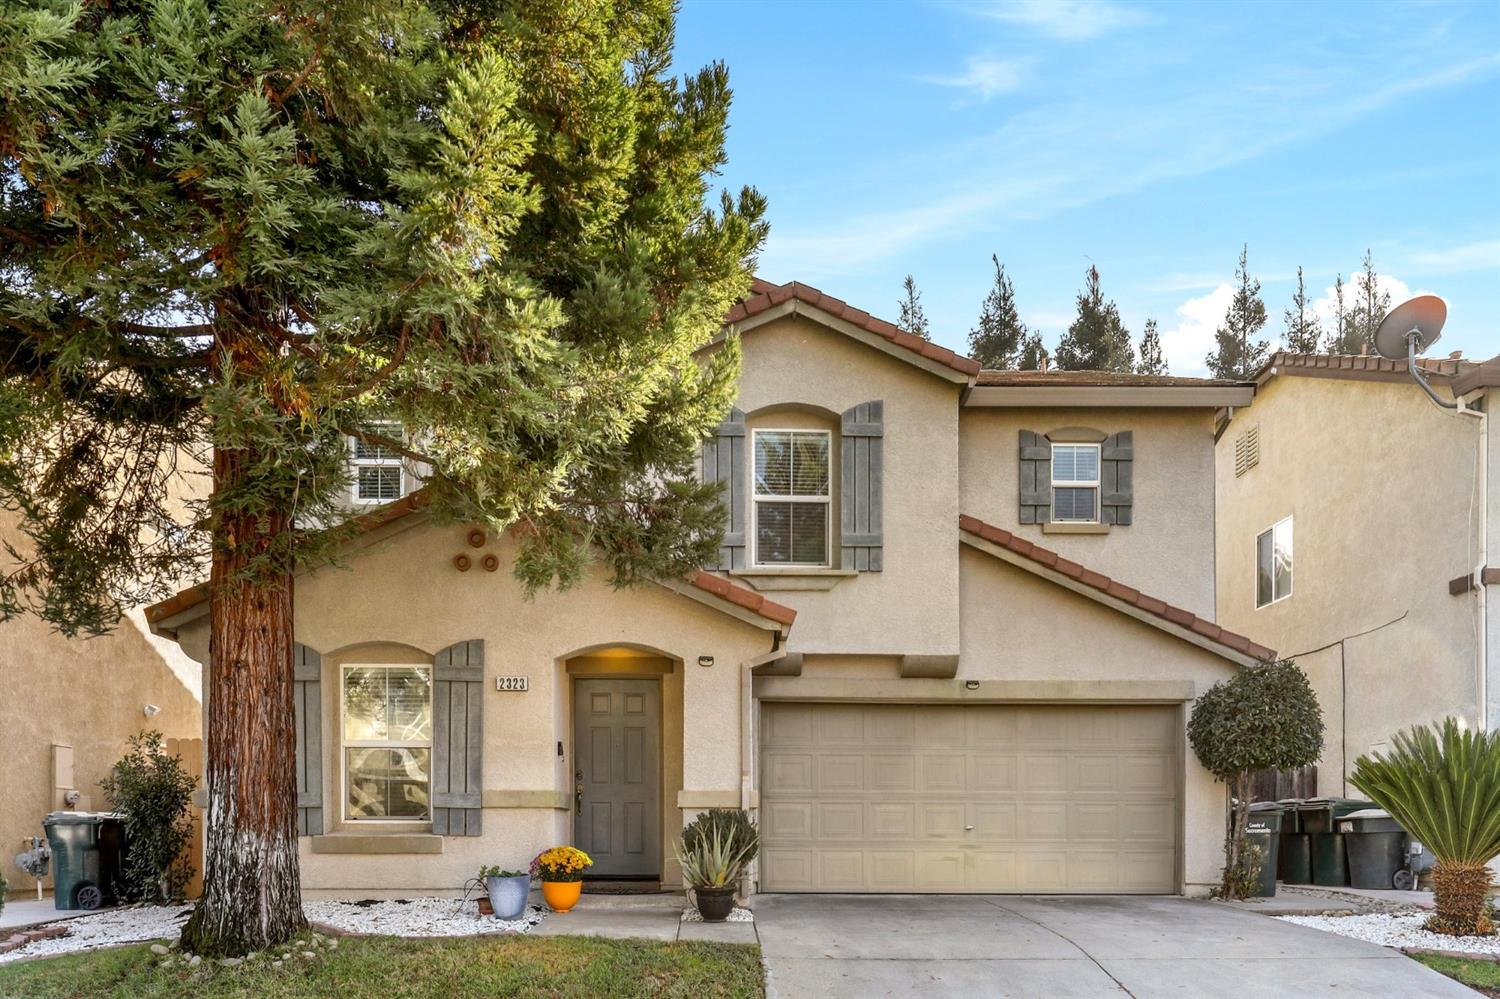 Stunning 4 bed 2.5 dream home in this highly desirable Gold River neighborhood!! This freshly painte